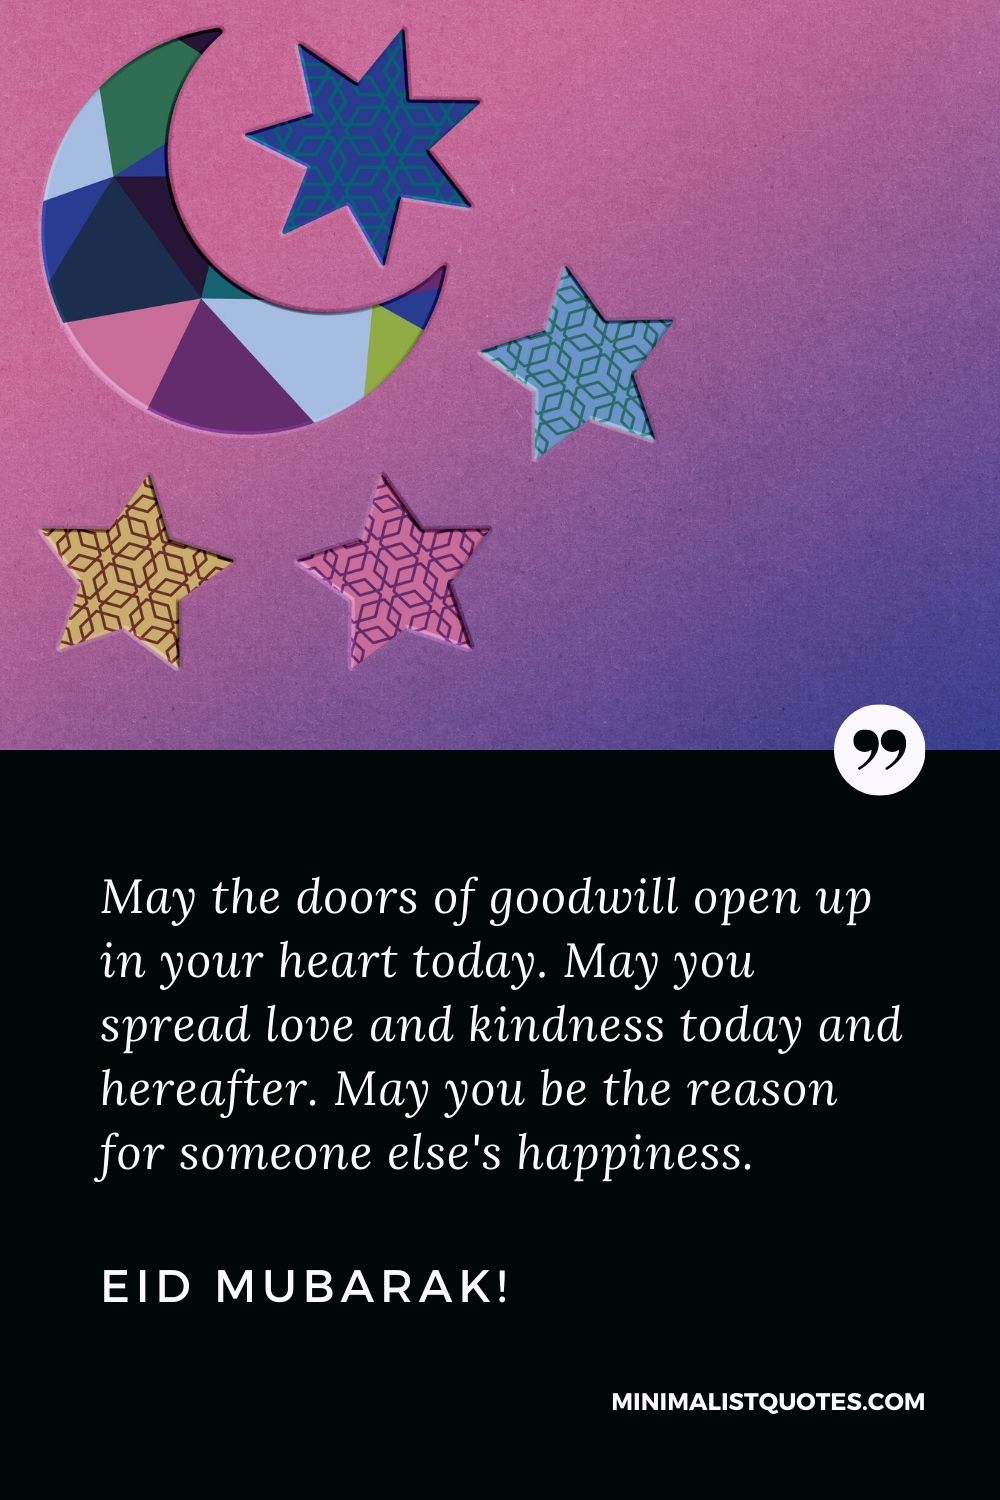 Eid Quote, Wish & Message With Image: May the doors of goodwill open up in your heart today. May you spread love and kindness today and hereafter. May you be the reason for someone else's happiness. Eid Mubarak!